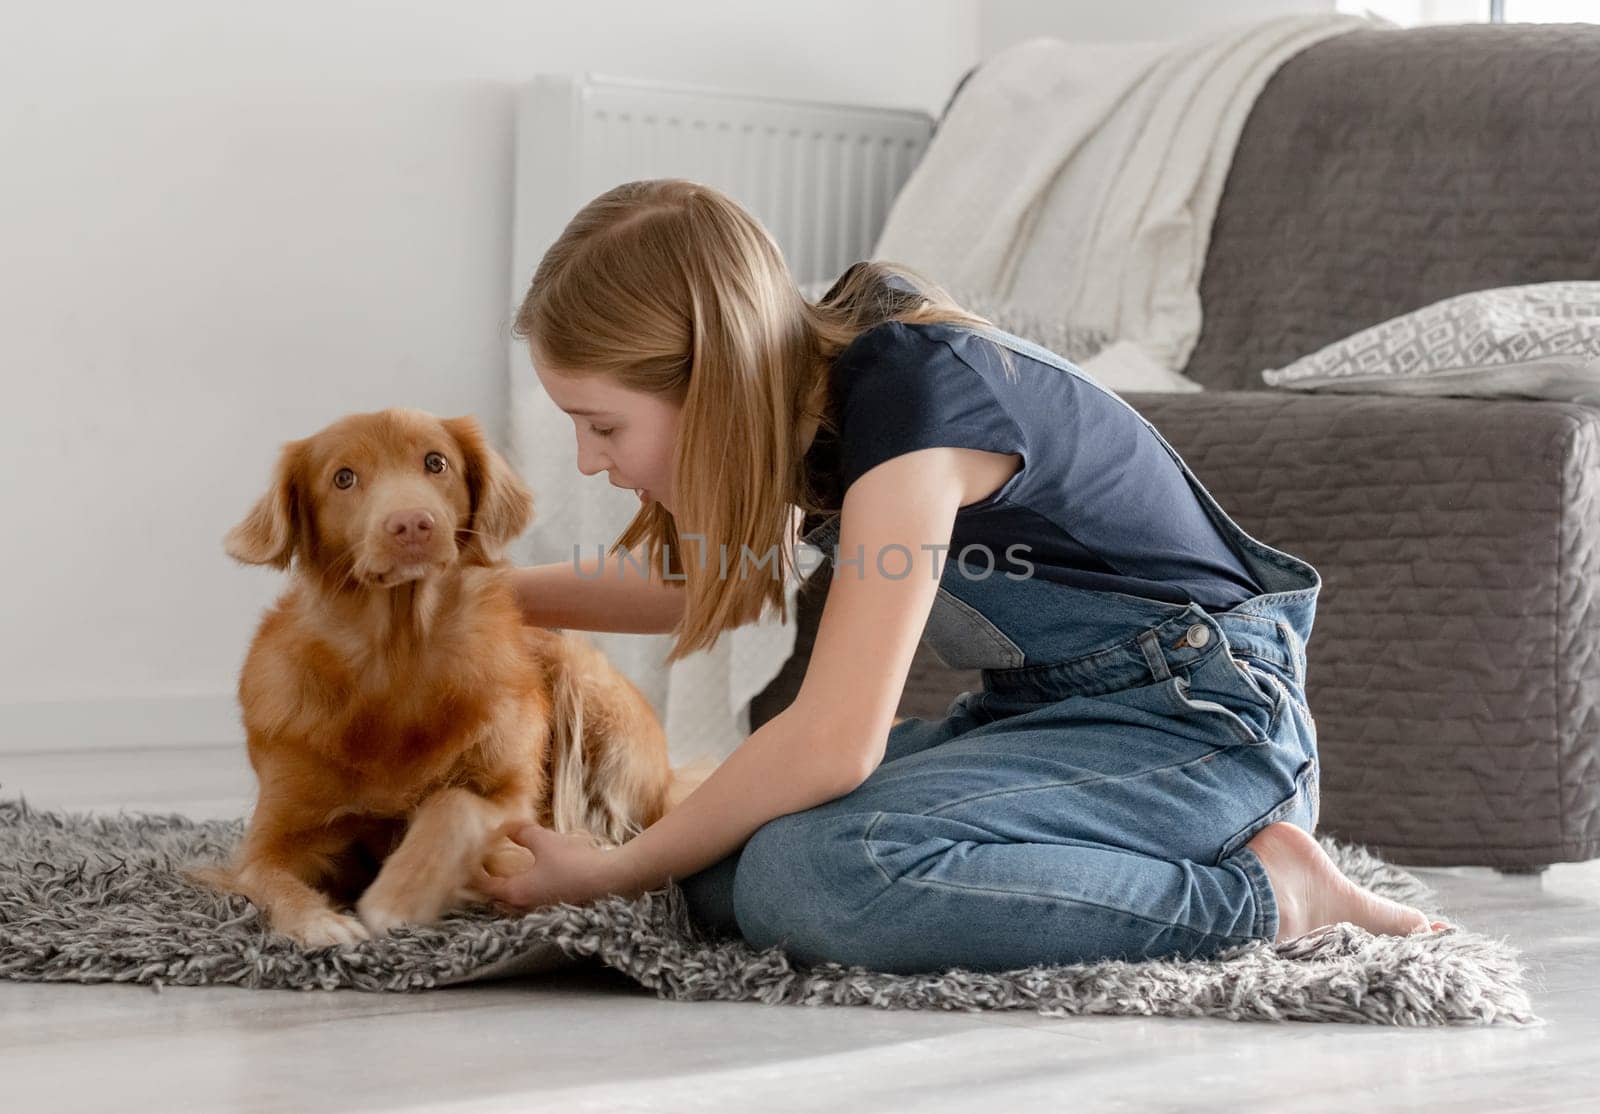 11-Year-Old Girl Plays With Nova Scotia Retriever Toller At Home On The Floor